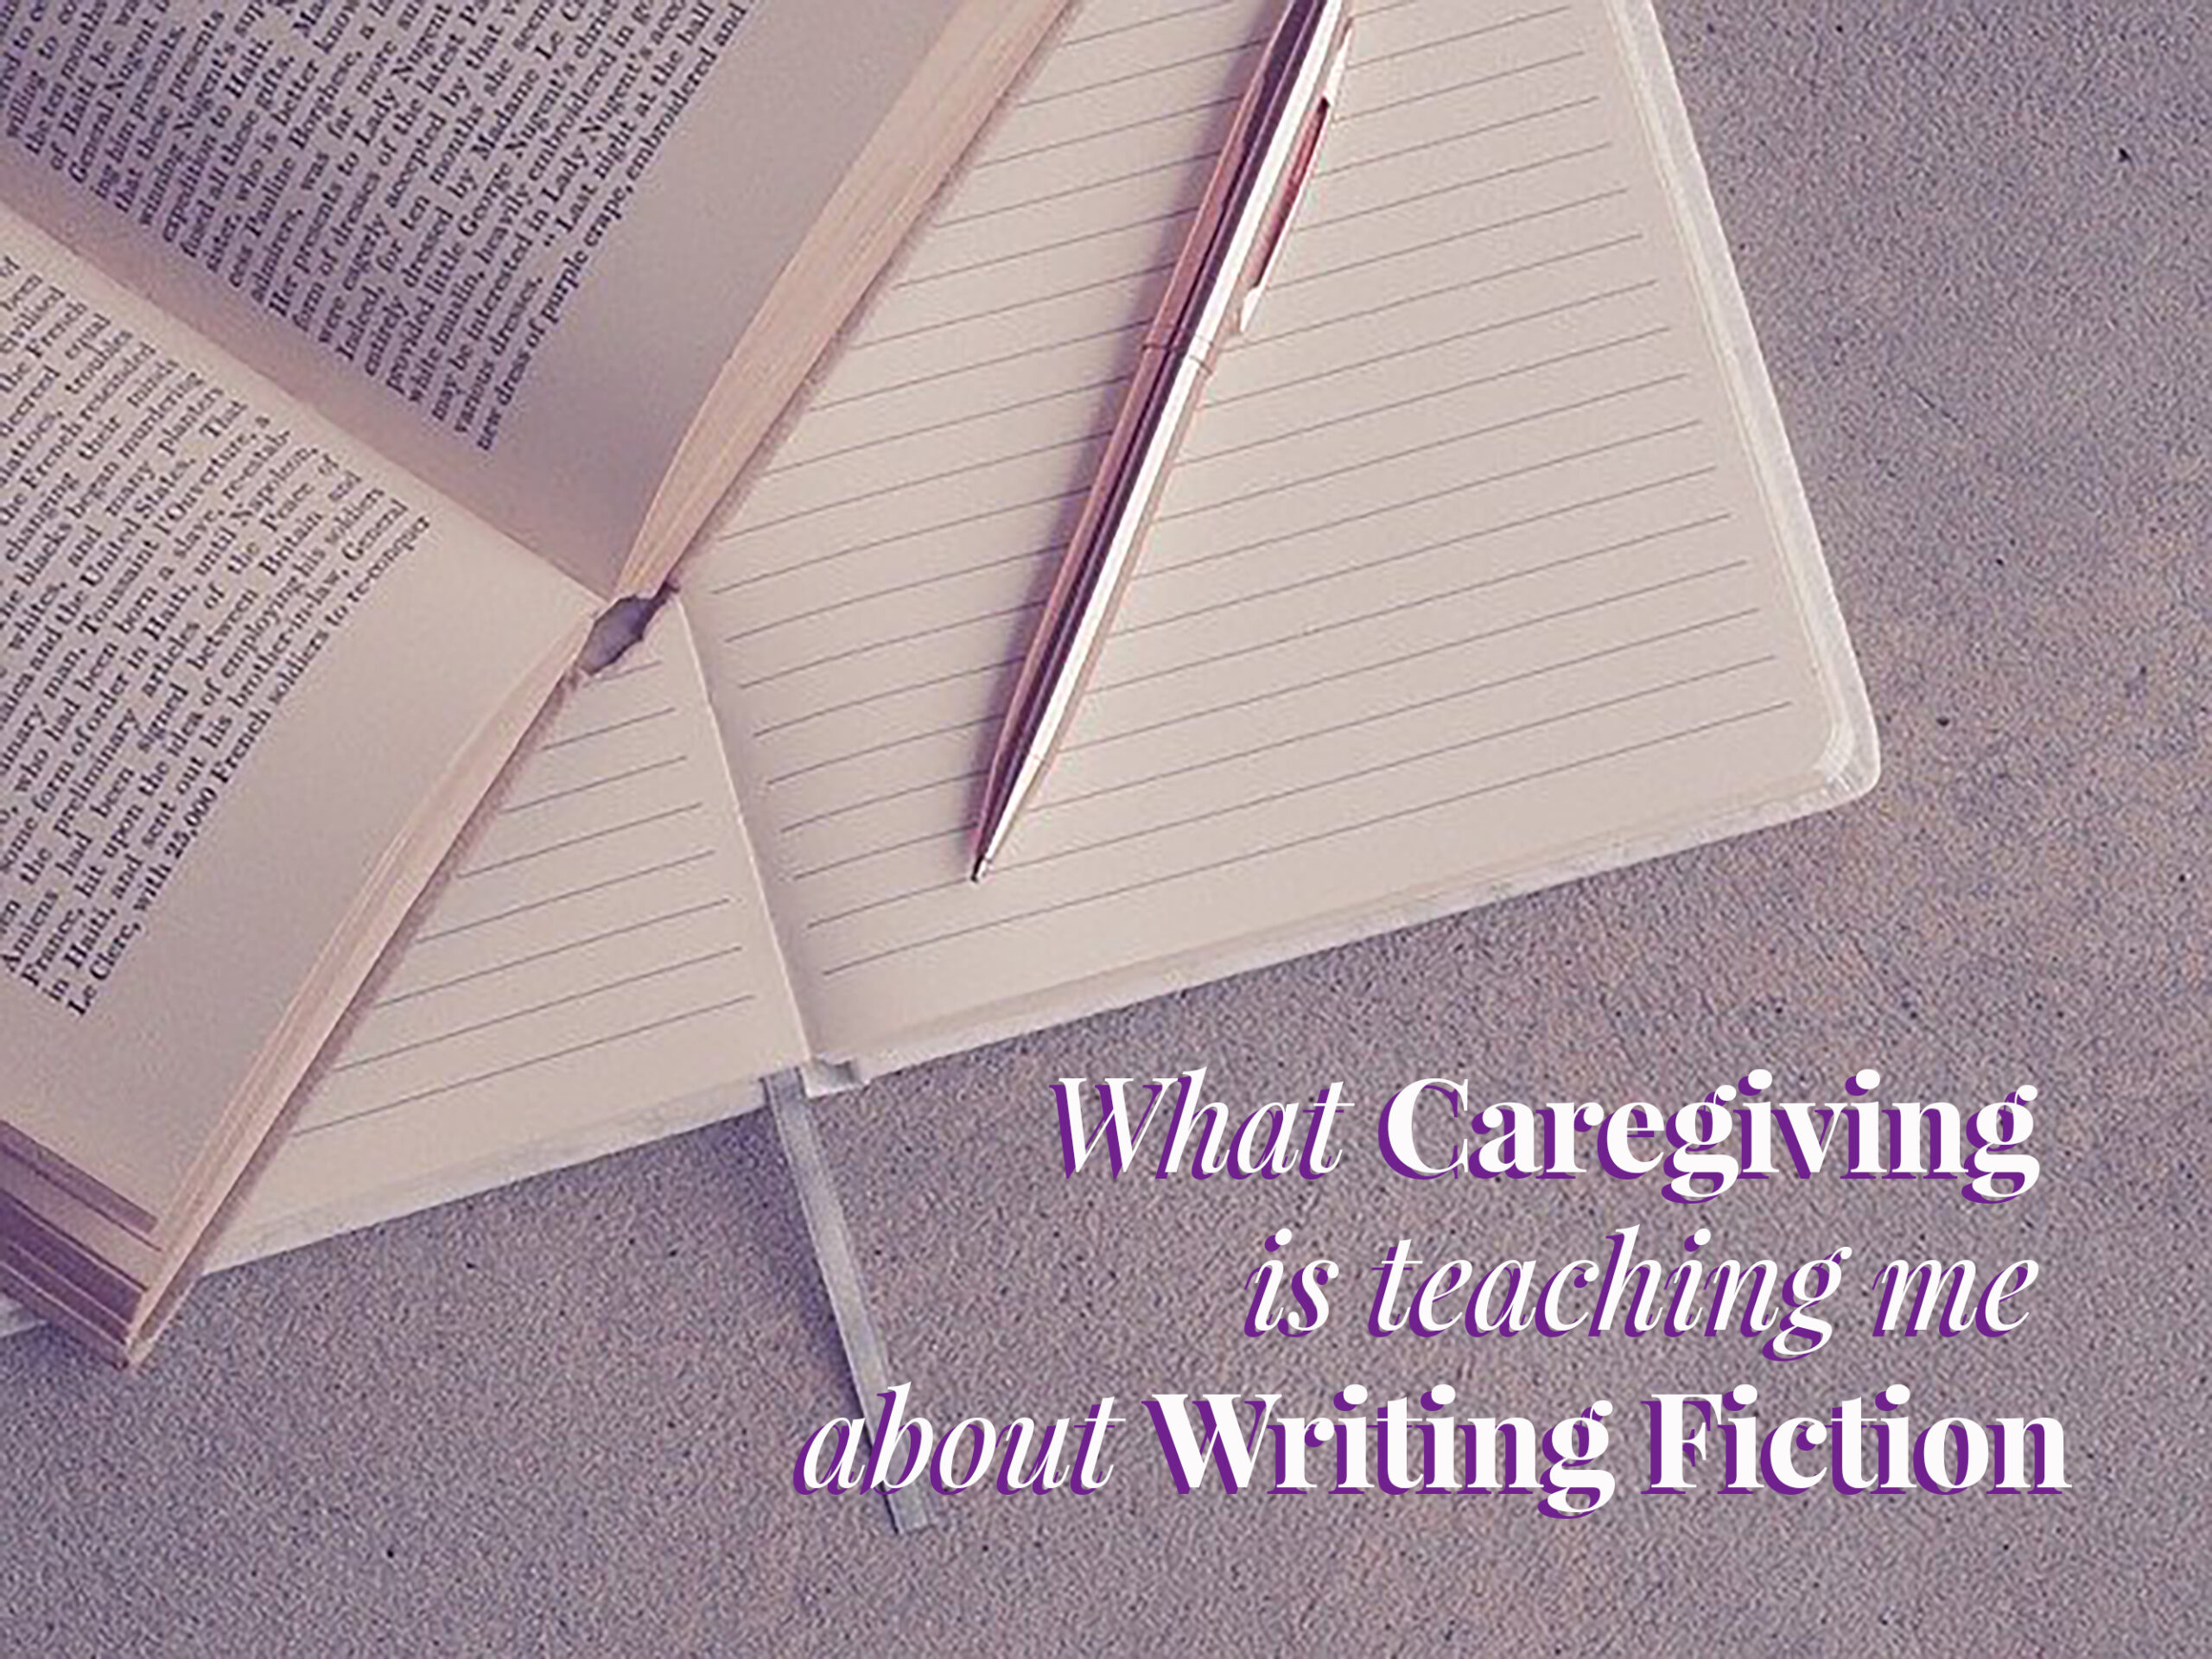 I explain what caregiving is teaching me about writing fiction. Although the two areas of life seem far apart, the parallels are there.